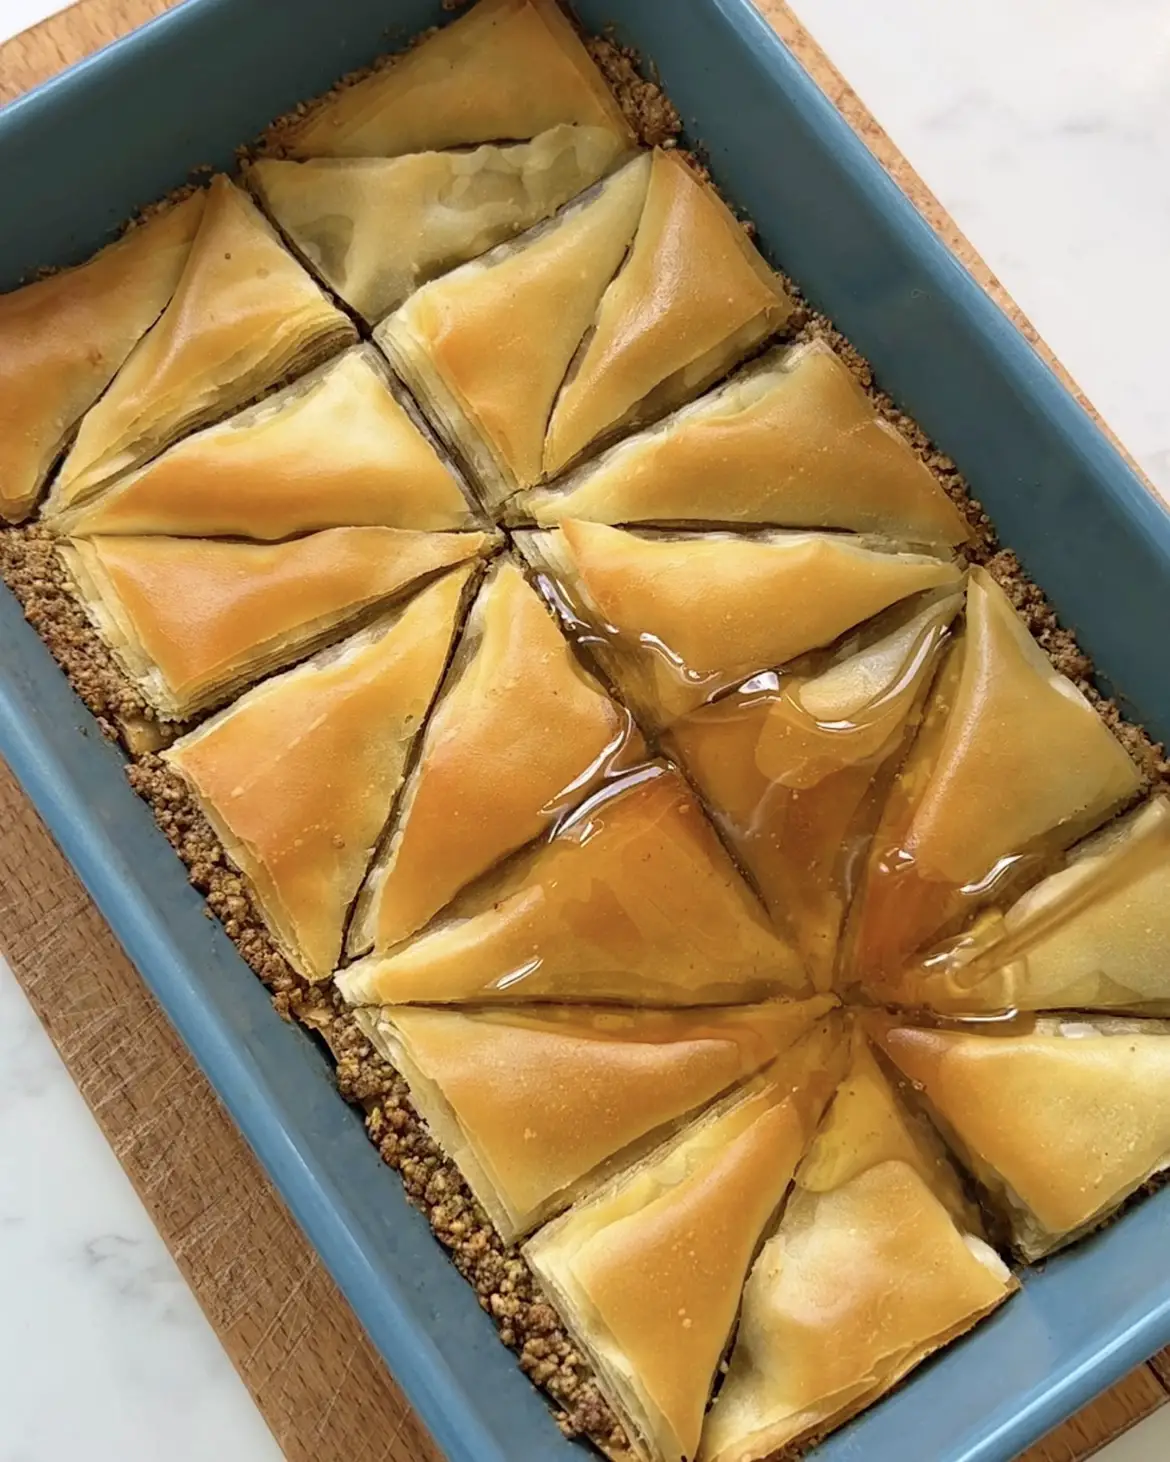 add the syrup to the baklava